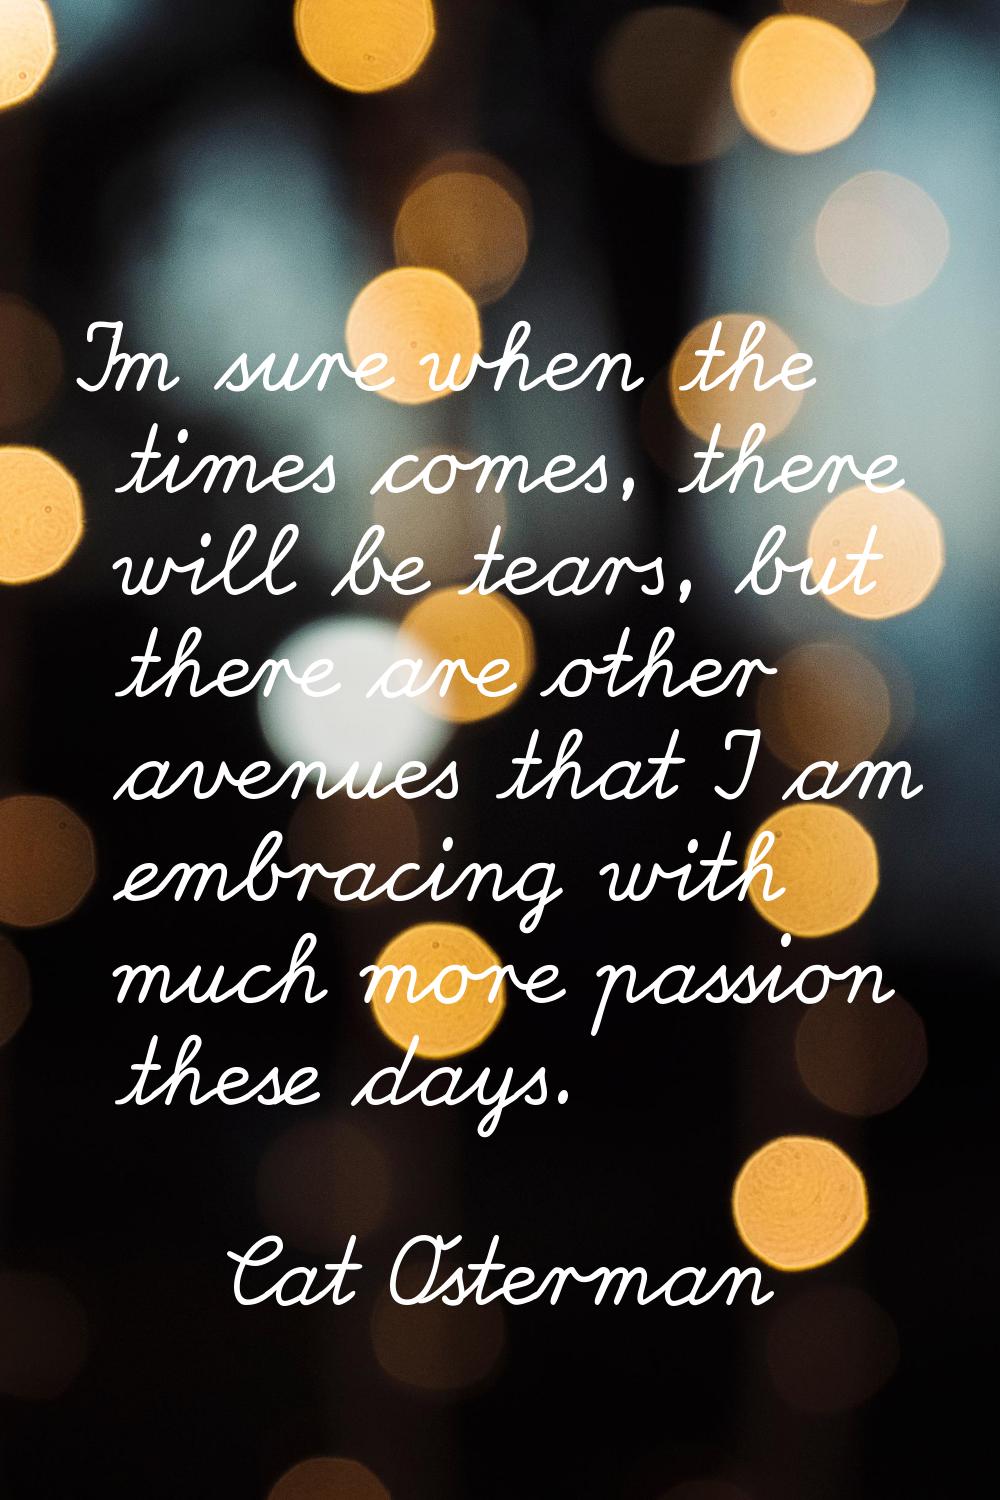 I'm sure when the times comes, there will be tears, but there are other avenues that I am embracing